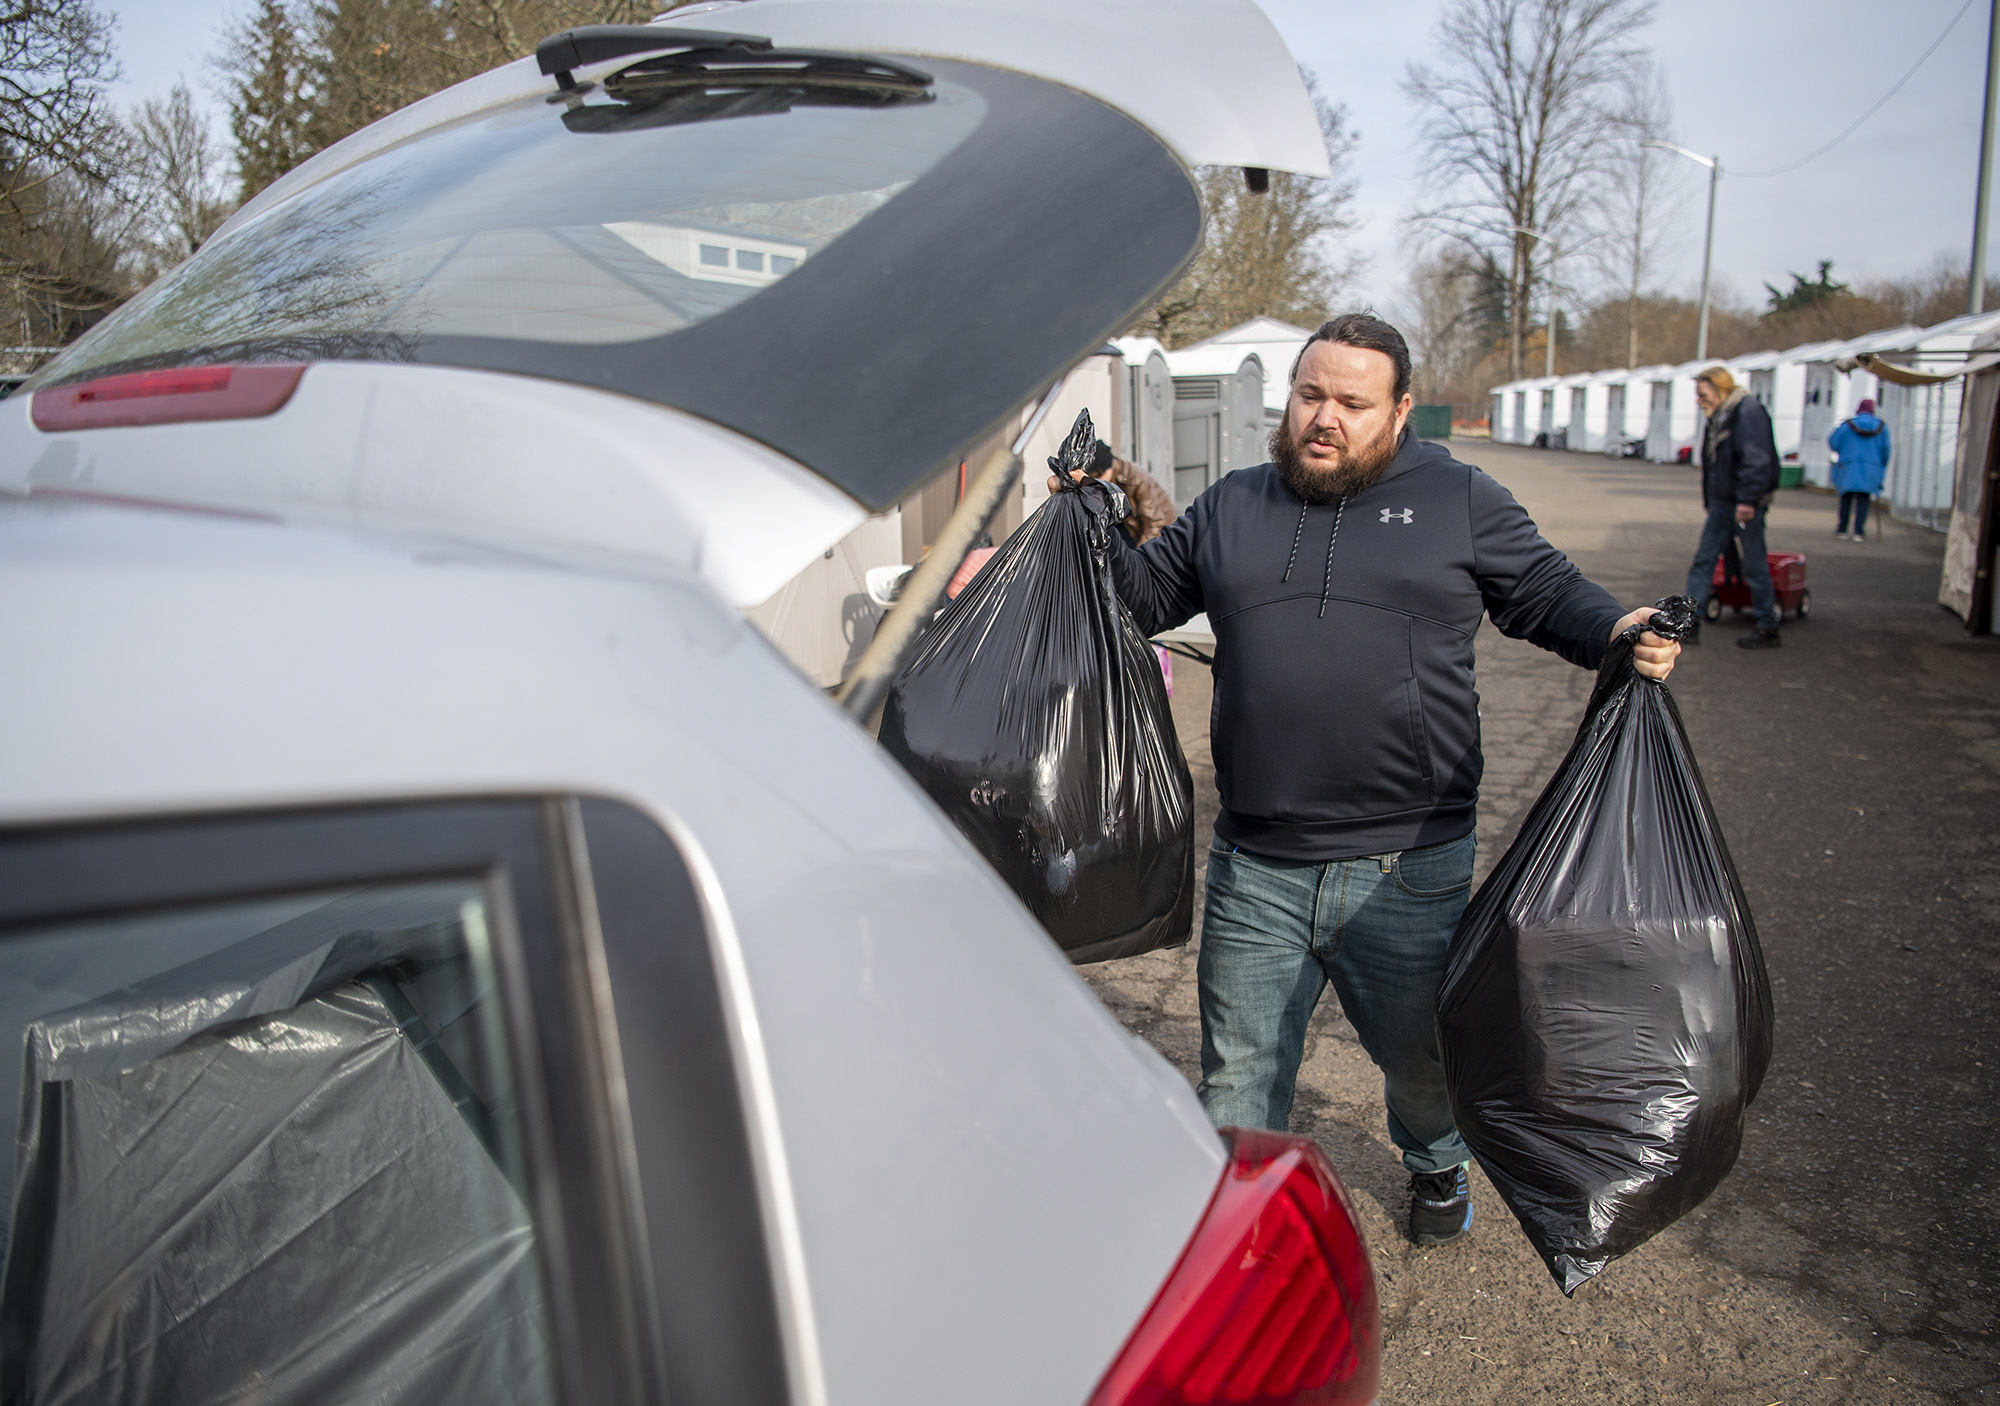 Stay Safe Community program manager Matthew Oakes loads donations into a vehicle Tuesday, Feb. 8, 2022, at the Stay Safe Community in east Vancouver. The site received a large donation of clothing and staff decided to send excess to Open House Ministries.